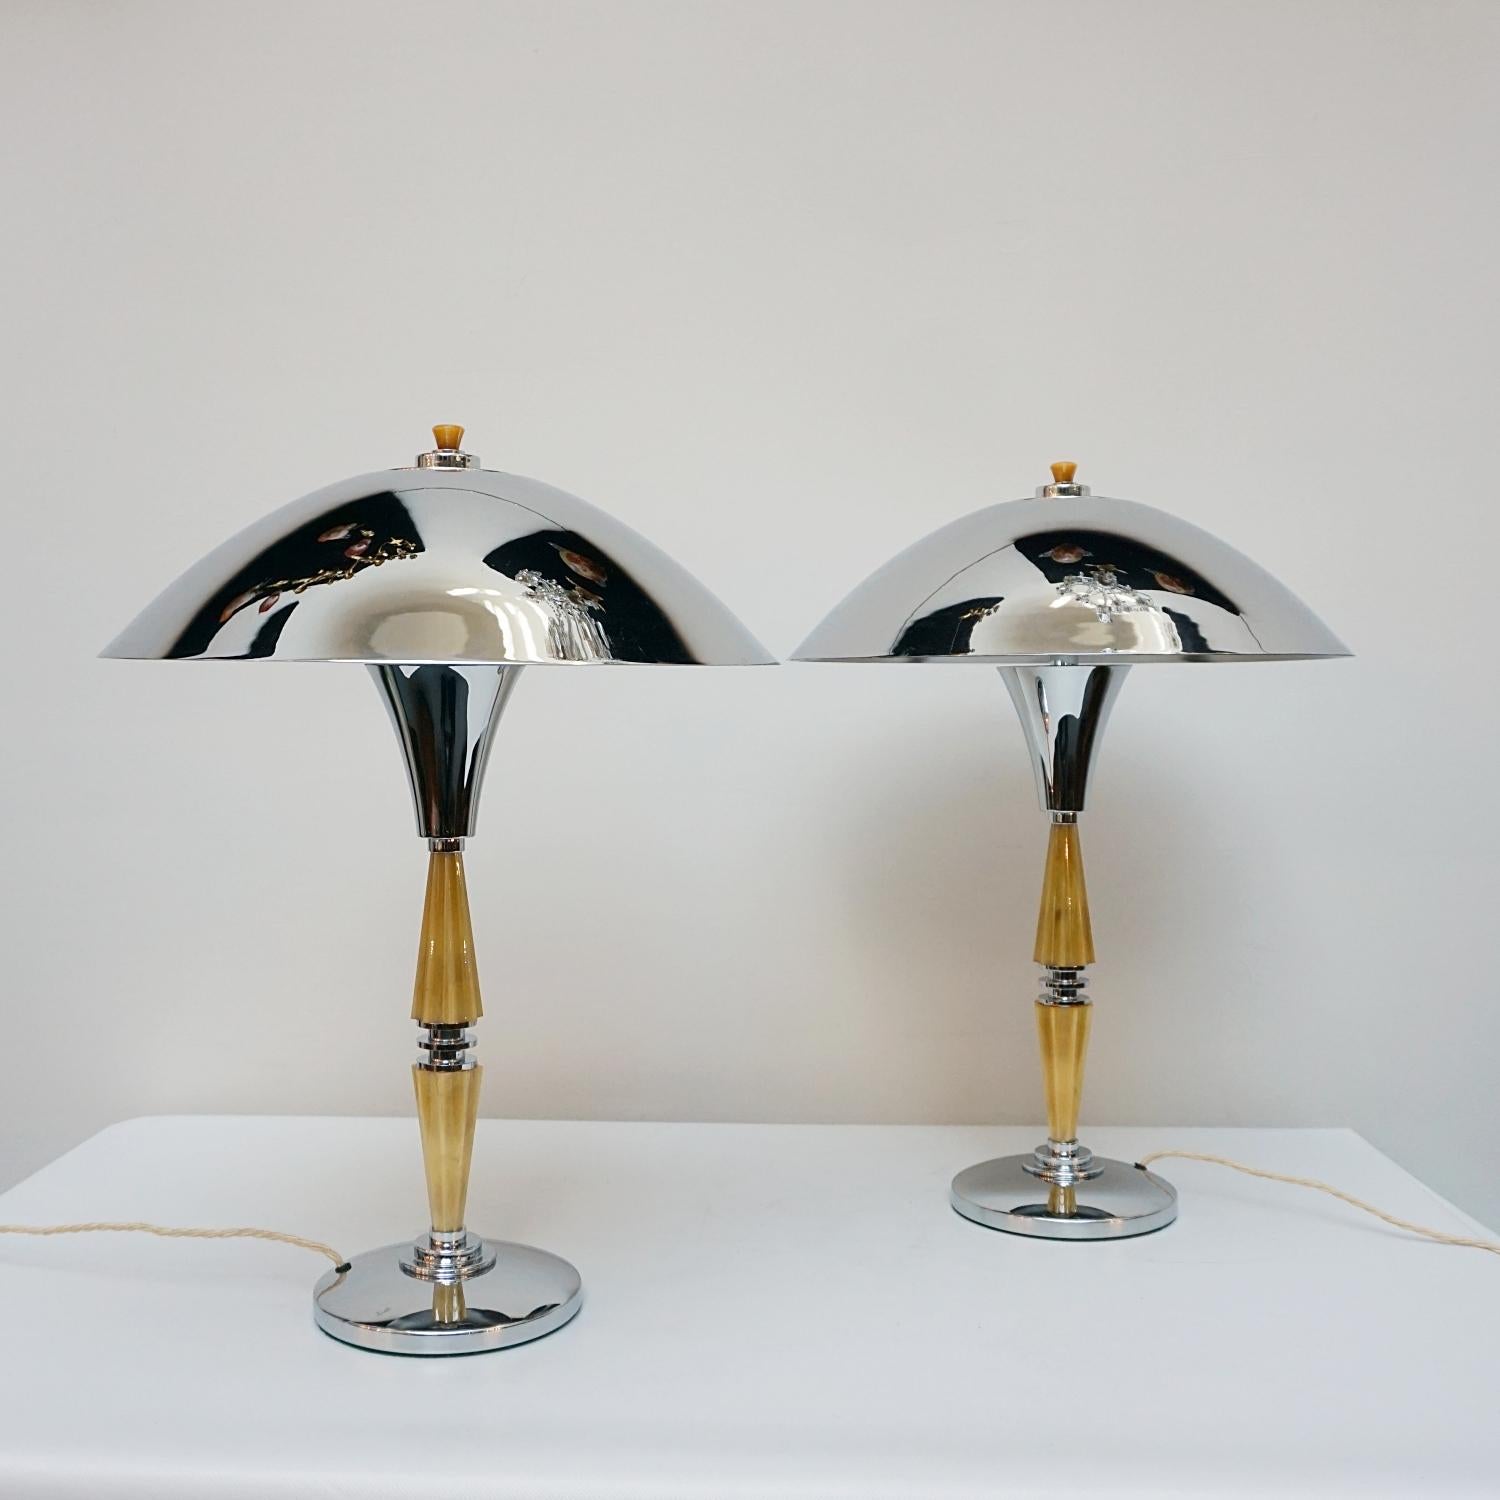 A pair of Art Deco style dome lamps. Yellow fluted bakelite stem with chrome banding, over a chromed metal circular base and a chromed metal shade. Chrome finial to top. 

Dimensions: H 60cm W 19cm

Origin: English

Item Number: J300

All of our